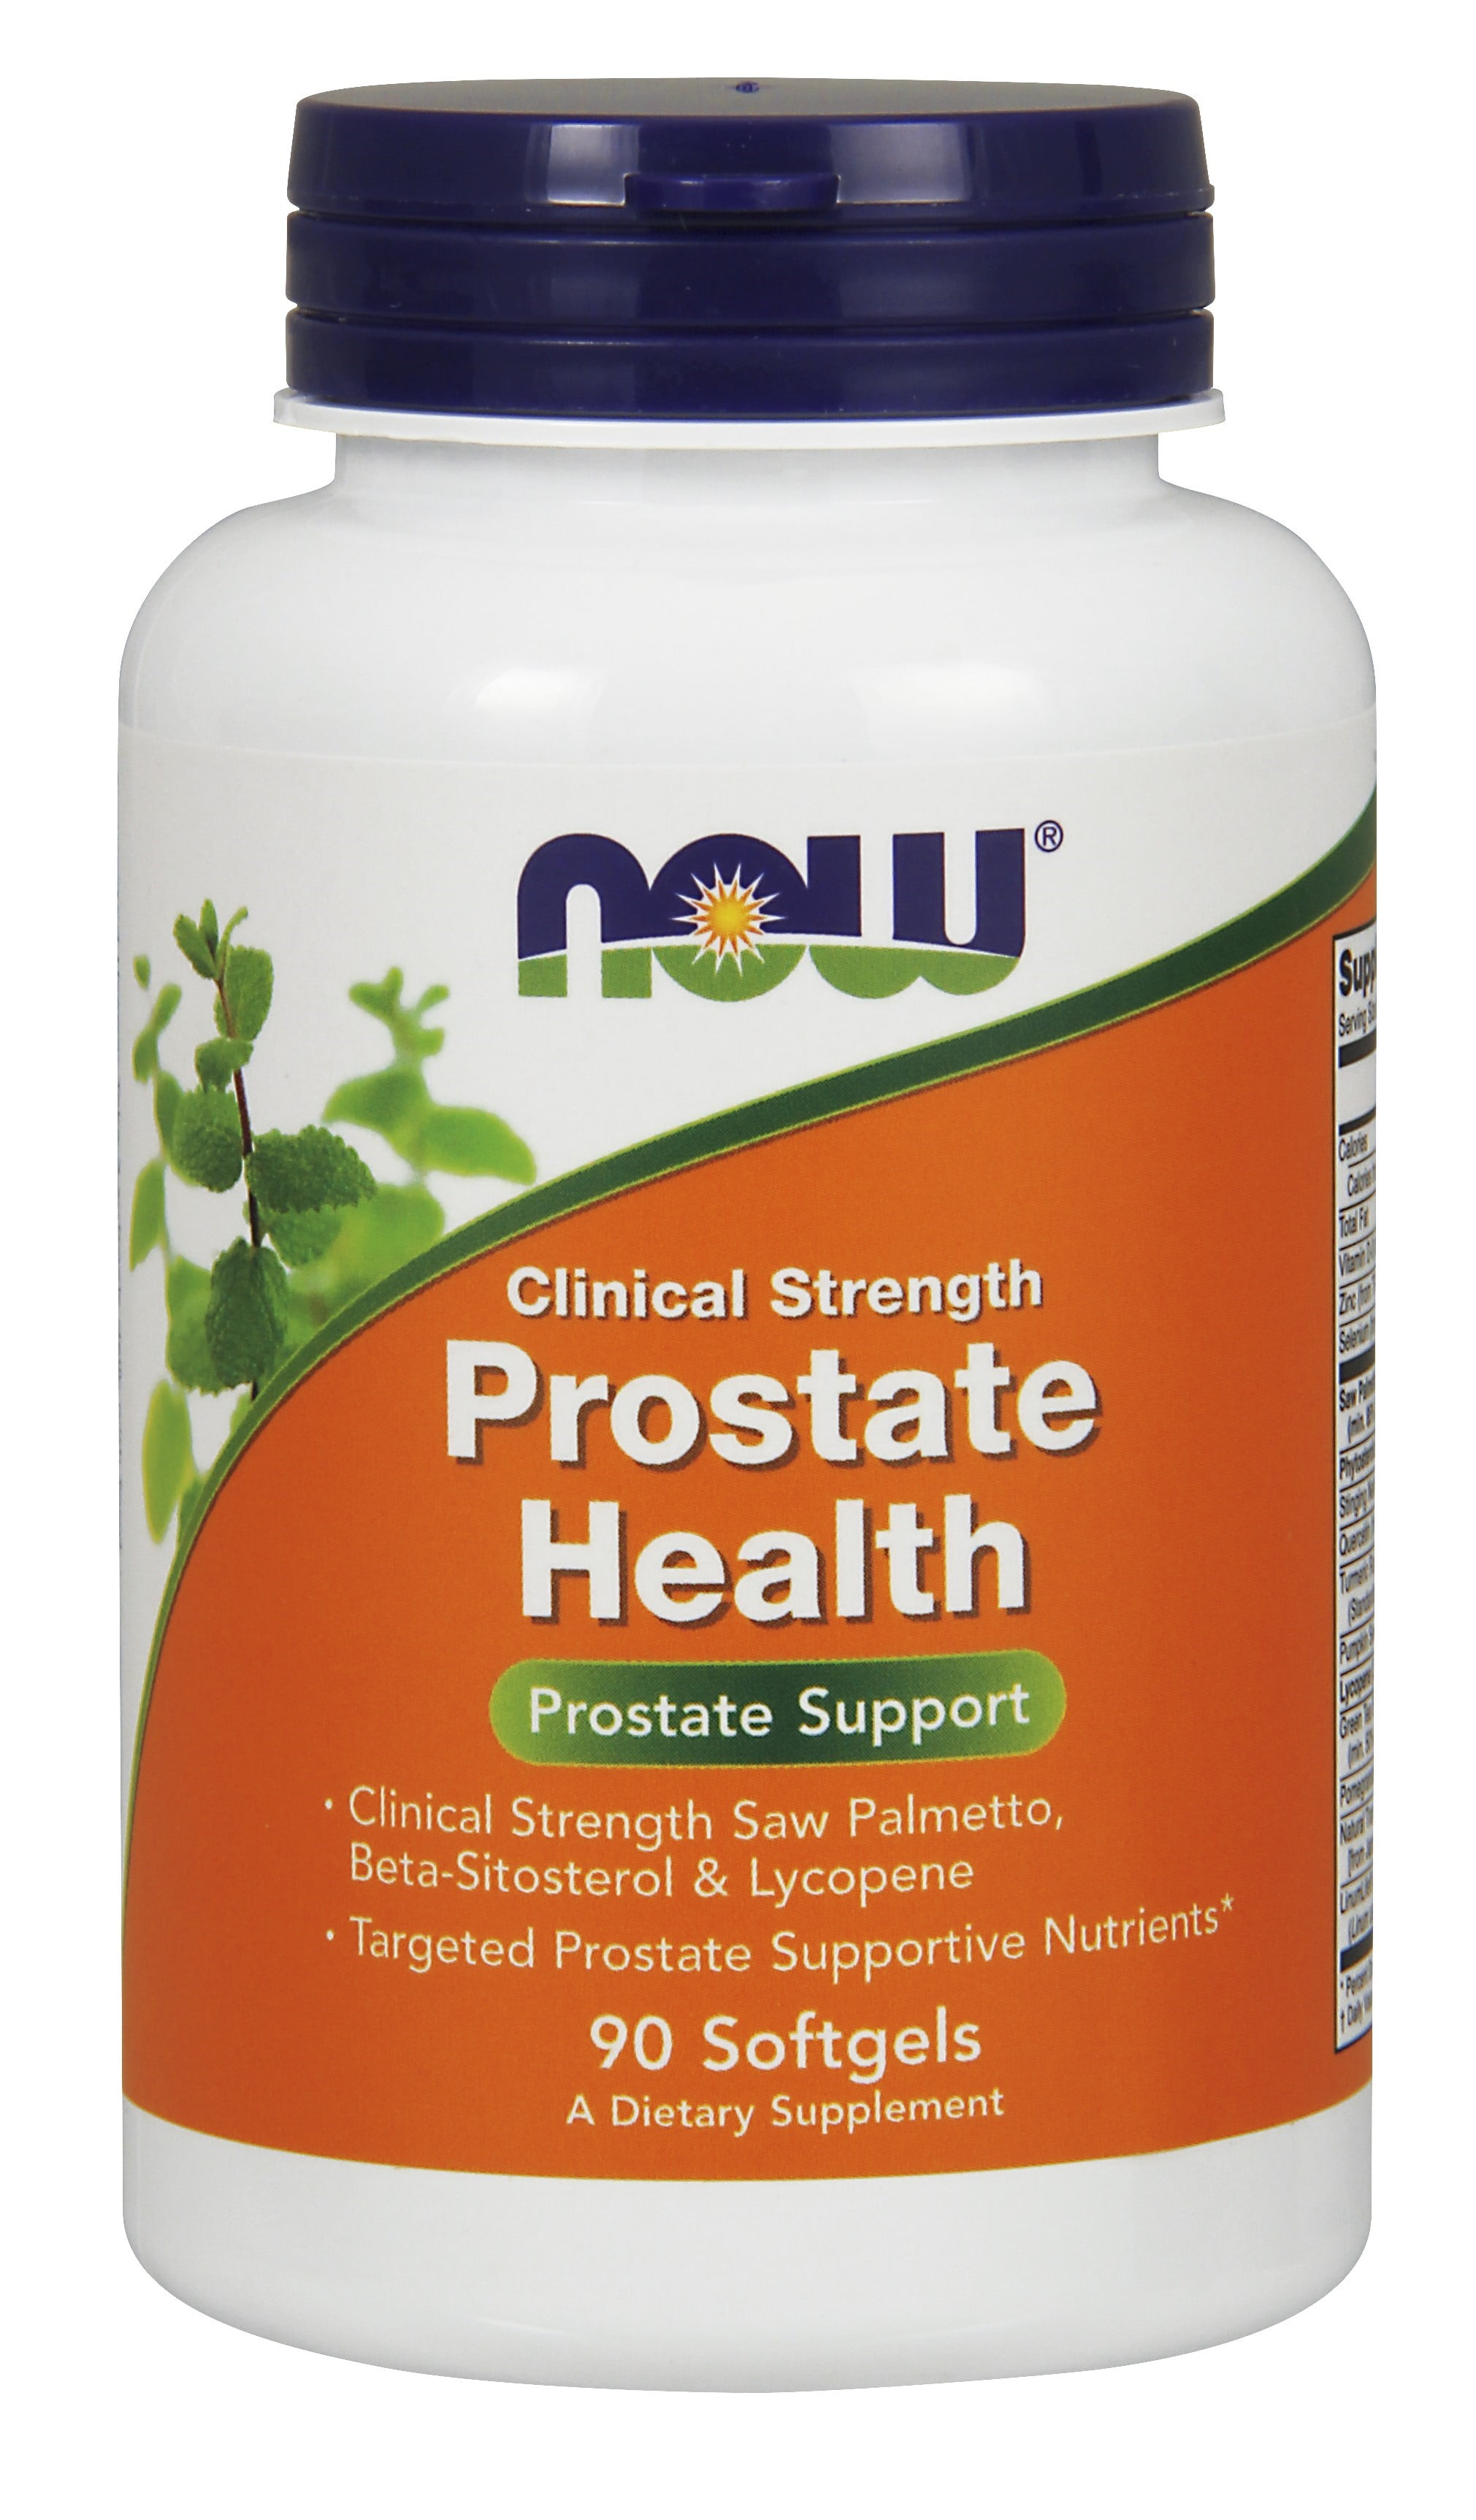 prostate health supplements canada)